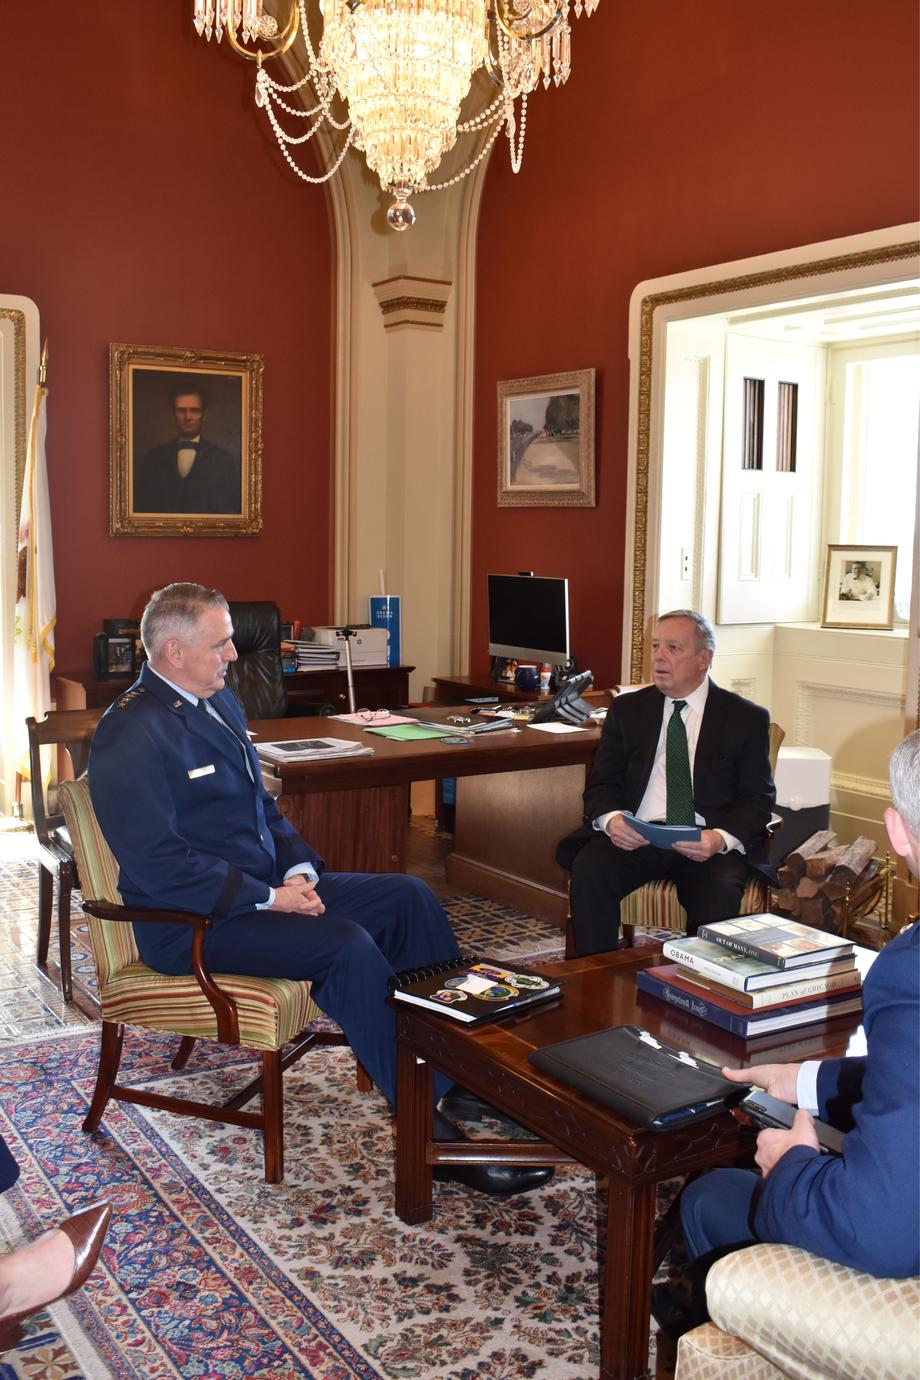 DURBIN DISCUSSES AIR MOBILITY COMMAND’S MISSION WITH GENERAL MINIHAN